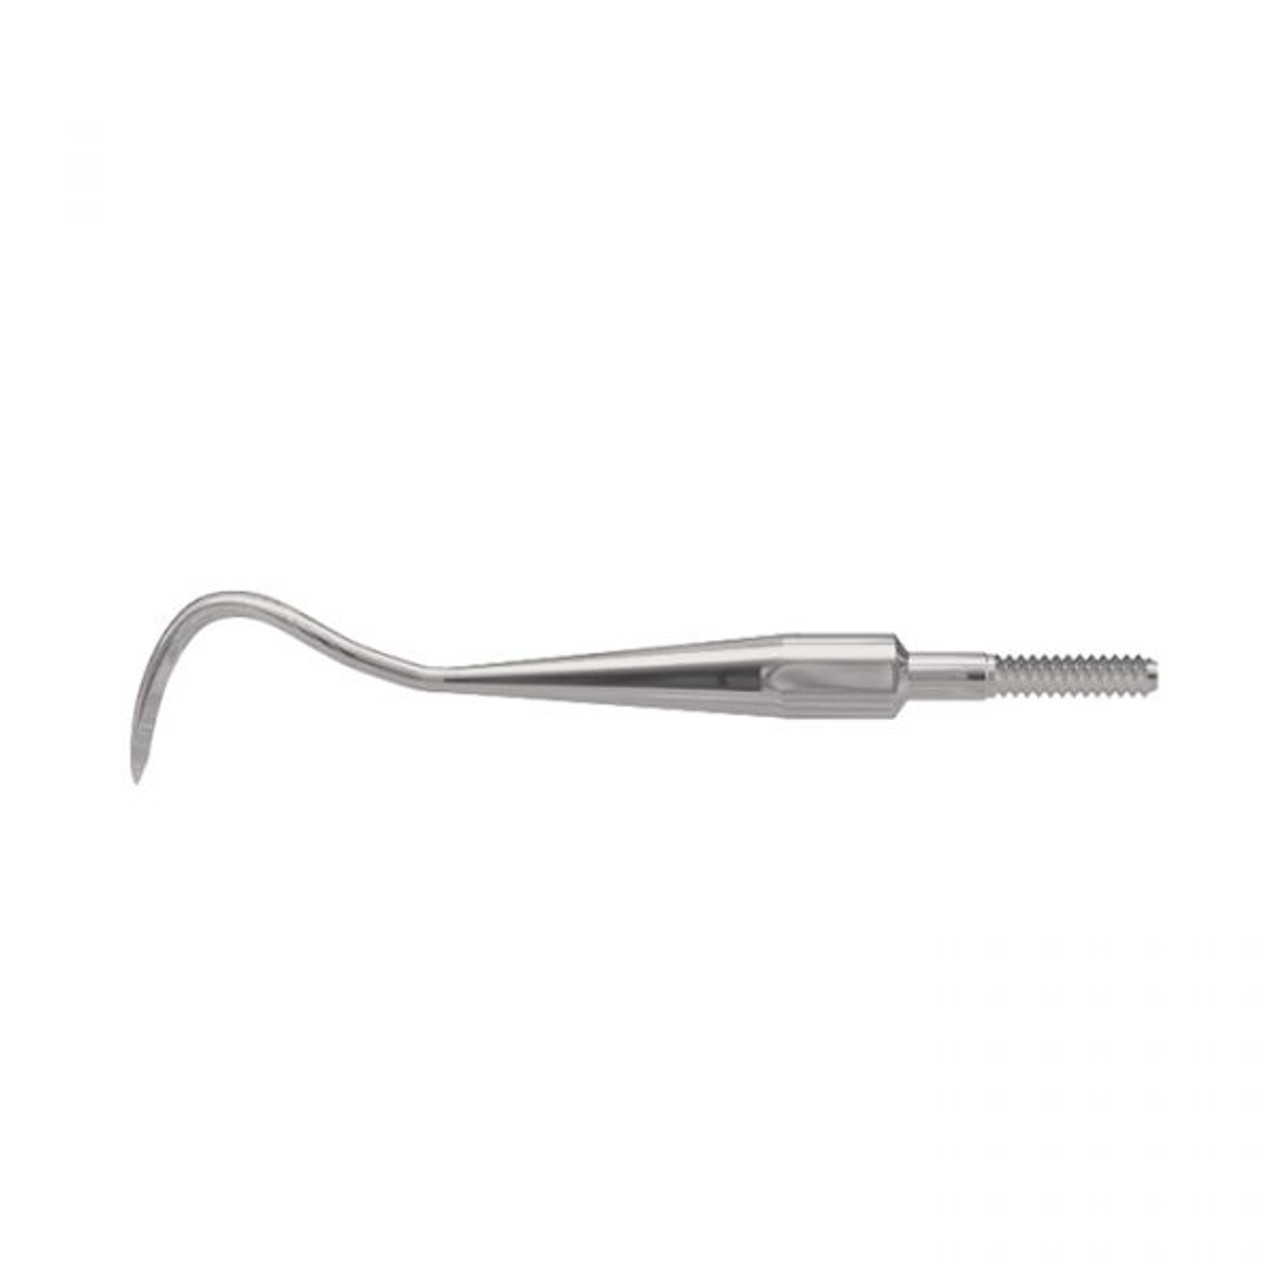 DE Scaler Eagle Claw A Stainless Steel Quik-Tip, AESECATTQT